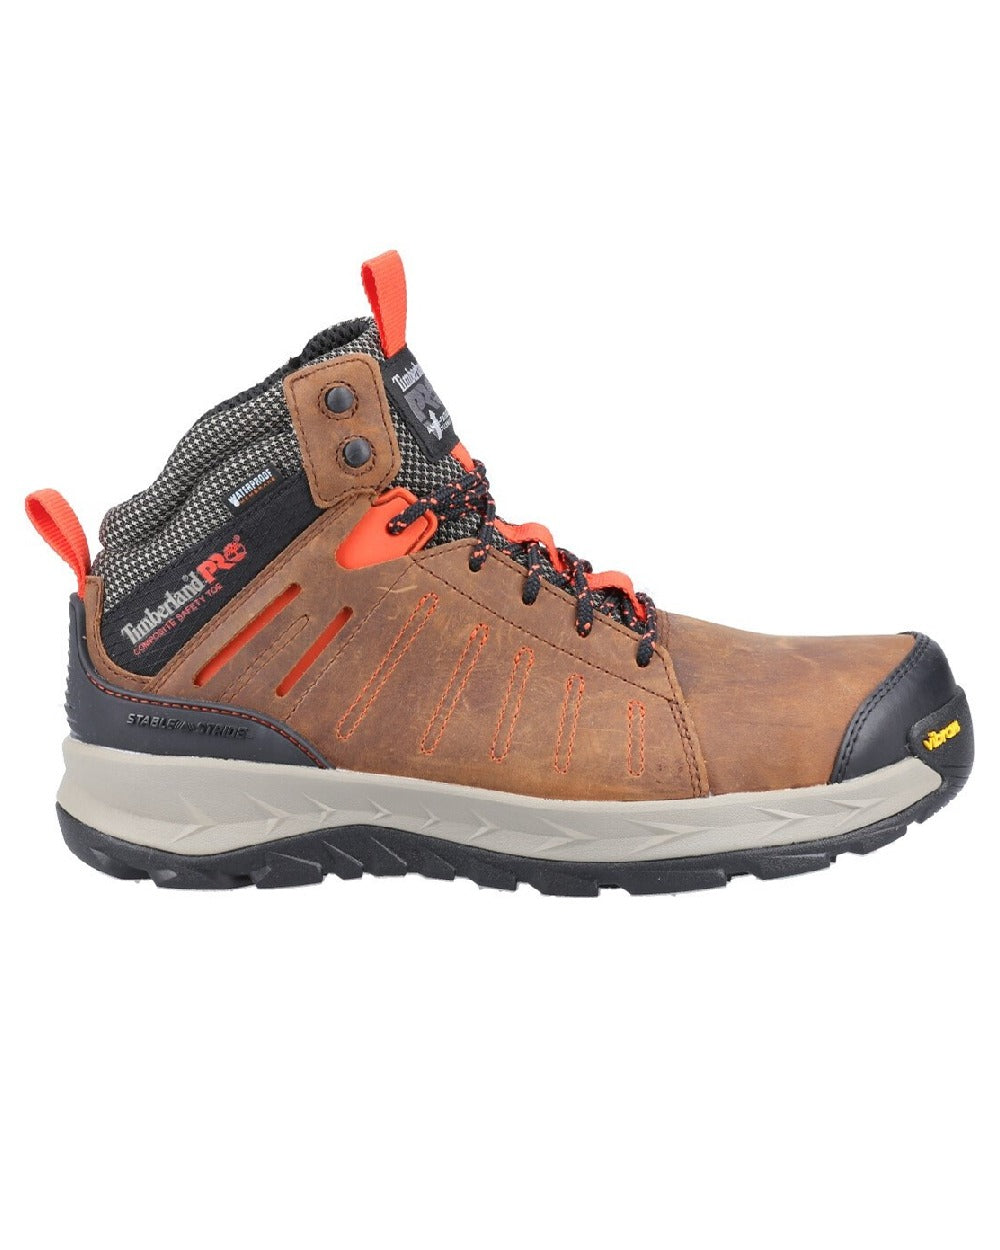 Brown coloured Timberland Pro Trailwind Work Boots on white background 